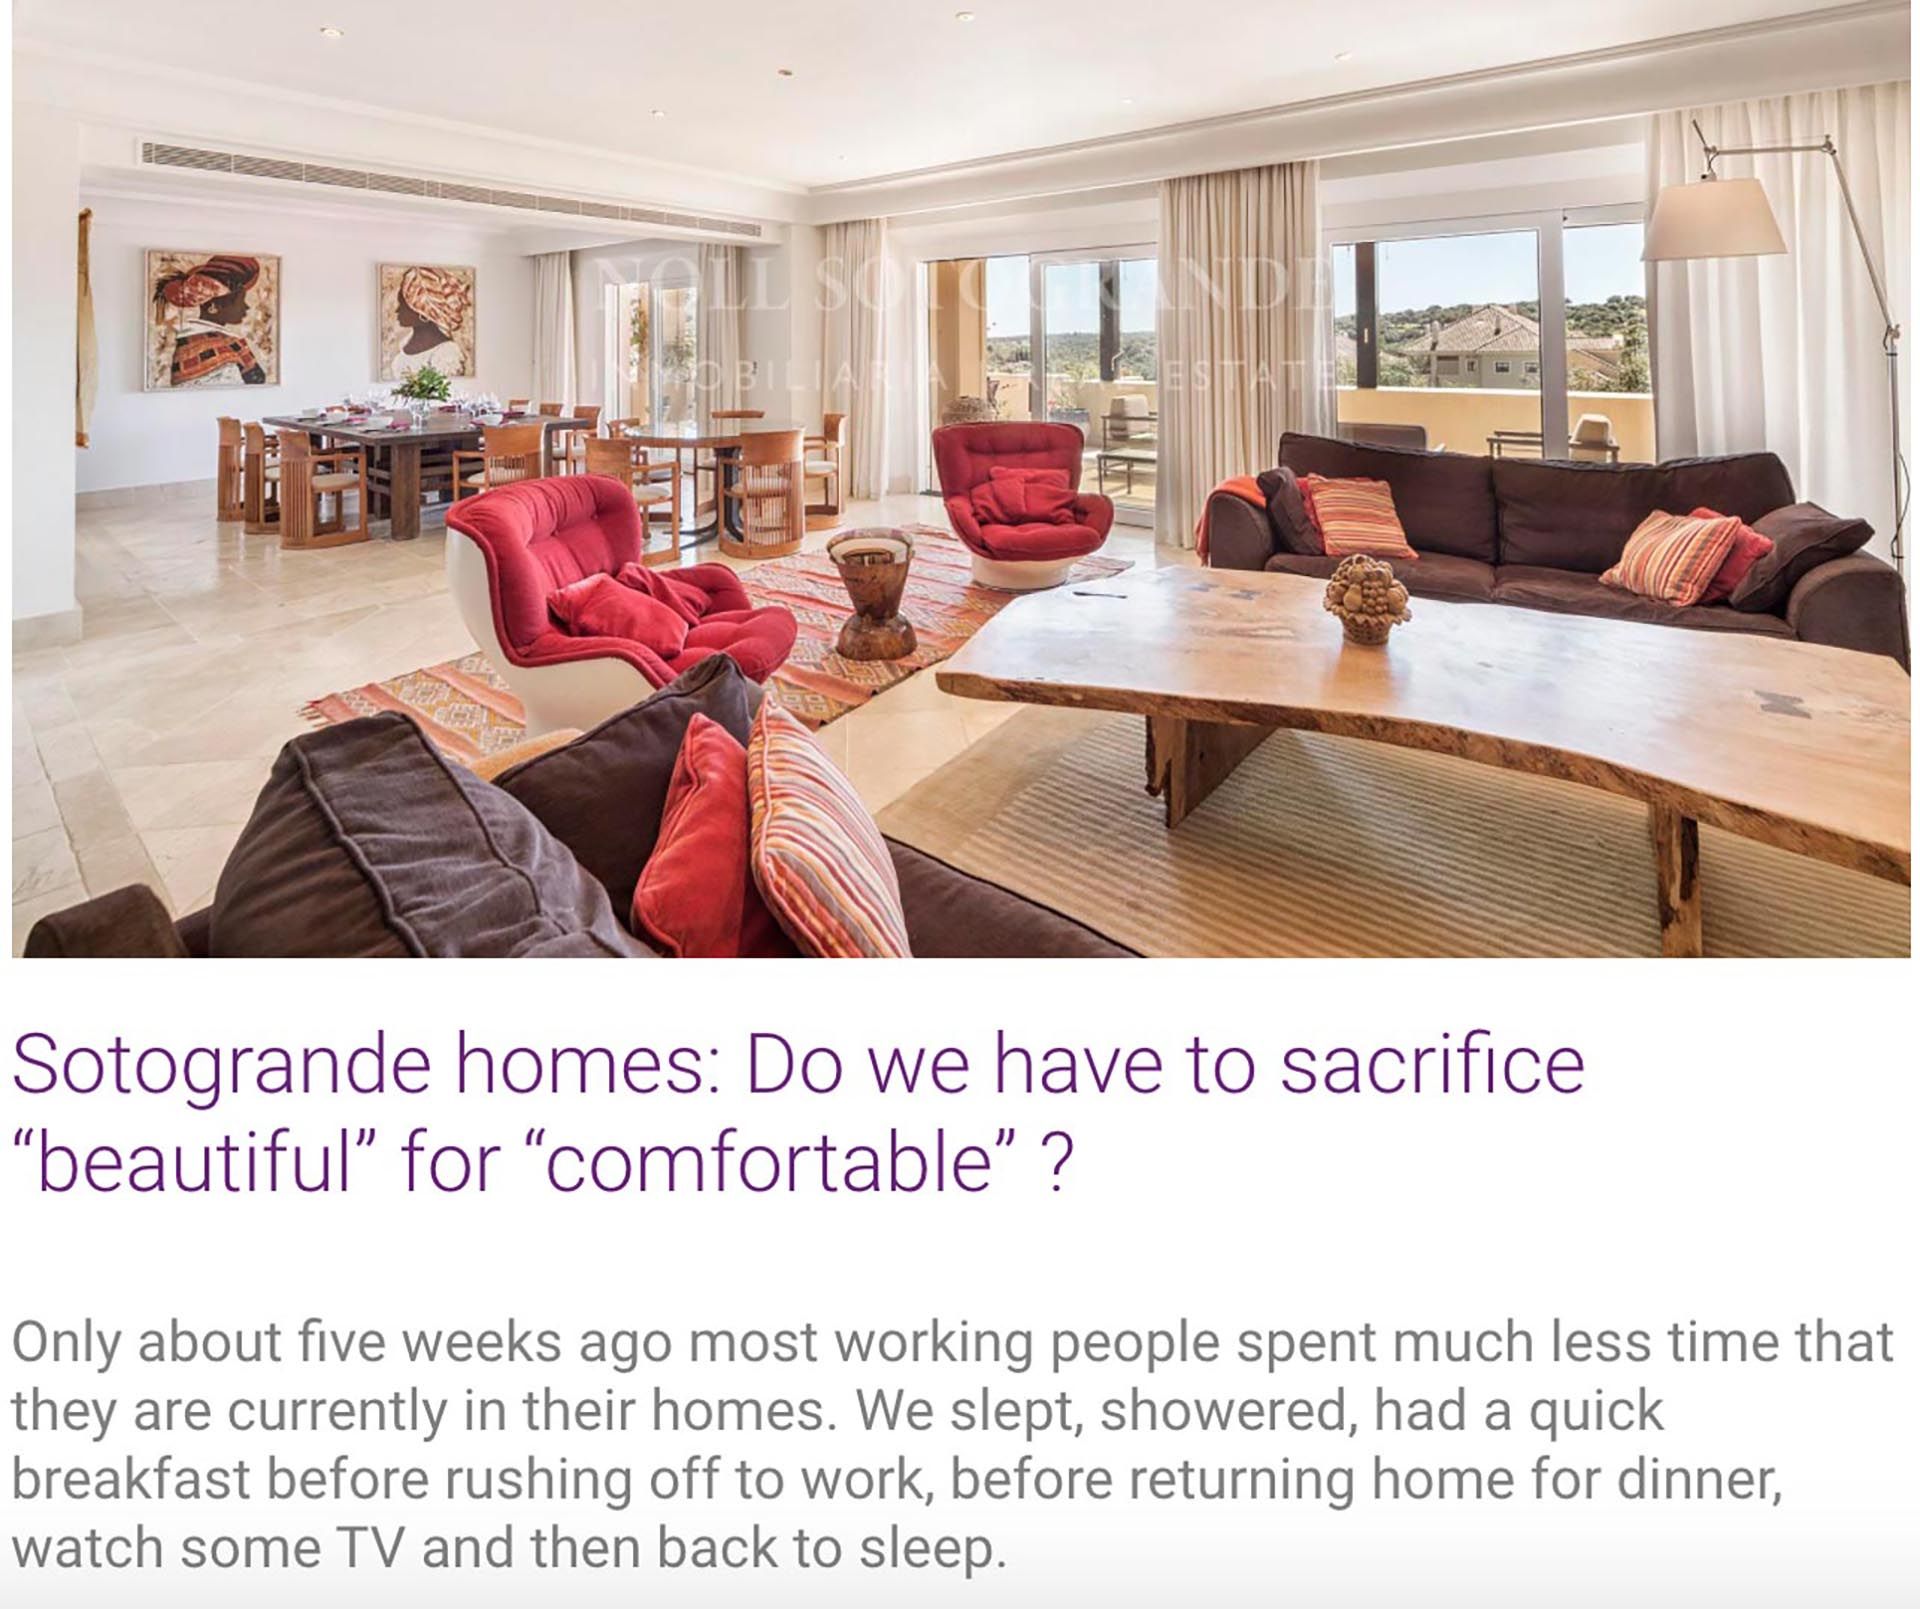 sotogrande-homes-do-we-have-to-sacrifice-beautiful-for-comfortable-banner